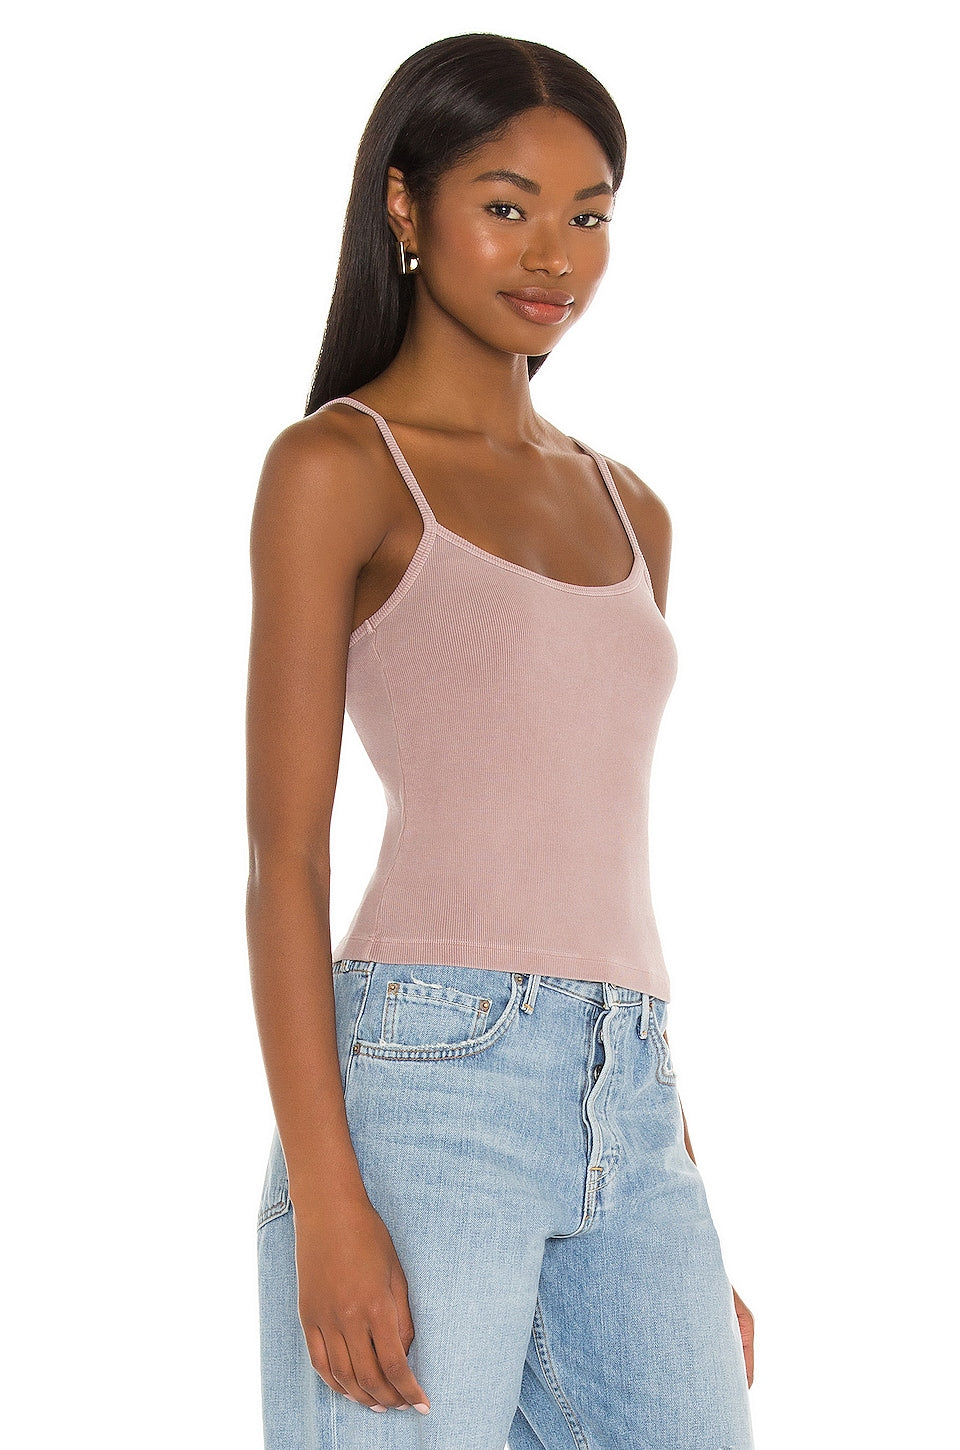 Green The Dylan Tank Top in LIGHT MAUVE